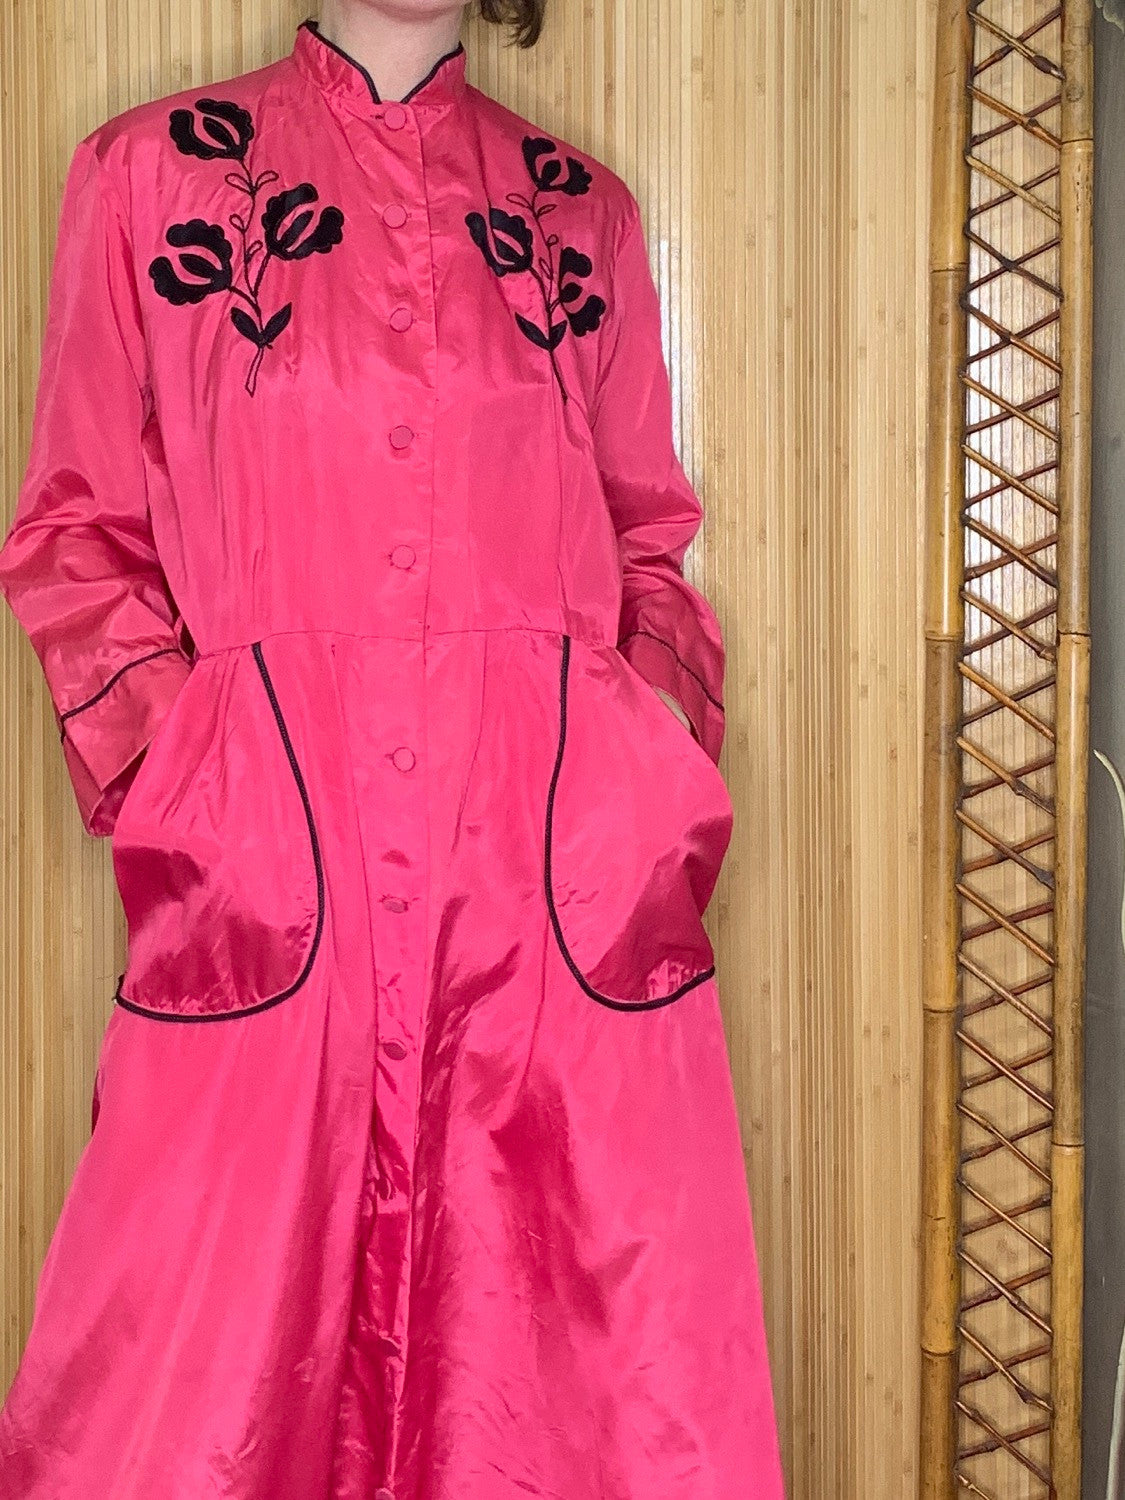 1950s Satin Applique Dressing Gown Robe